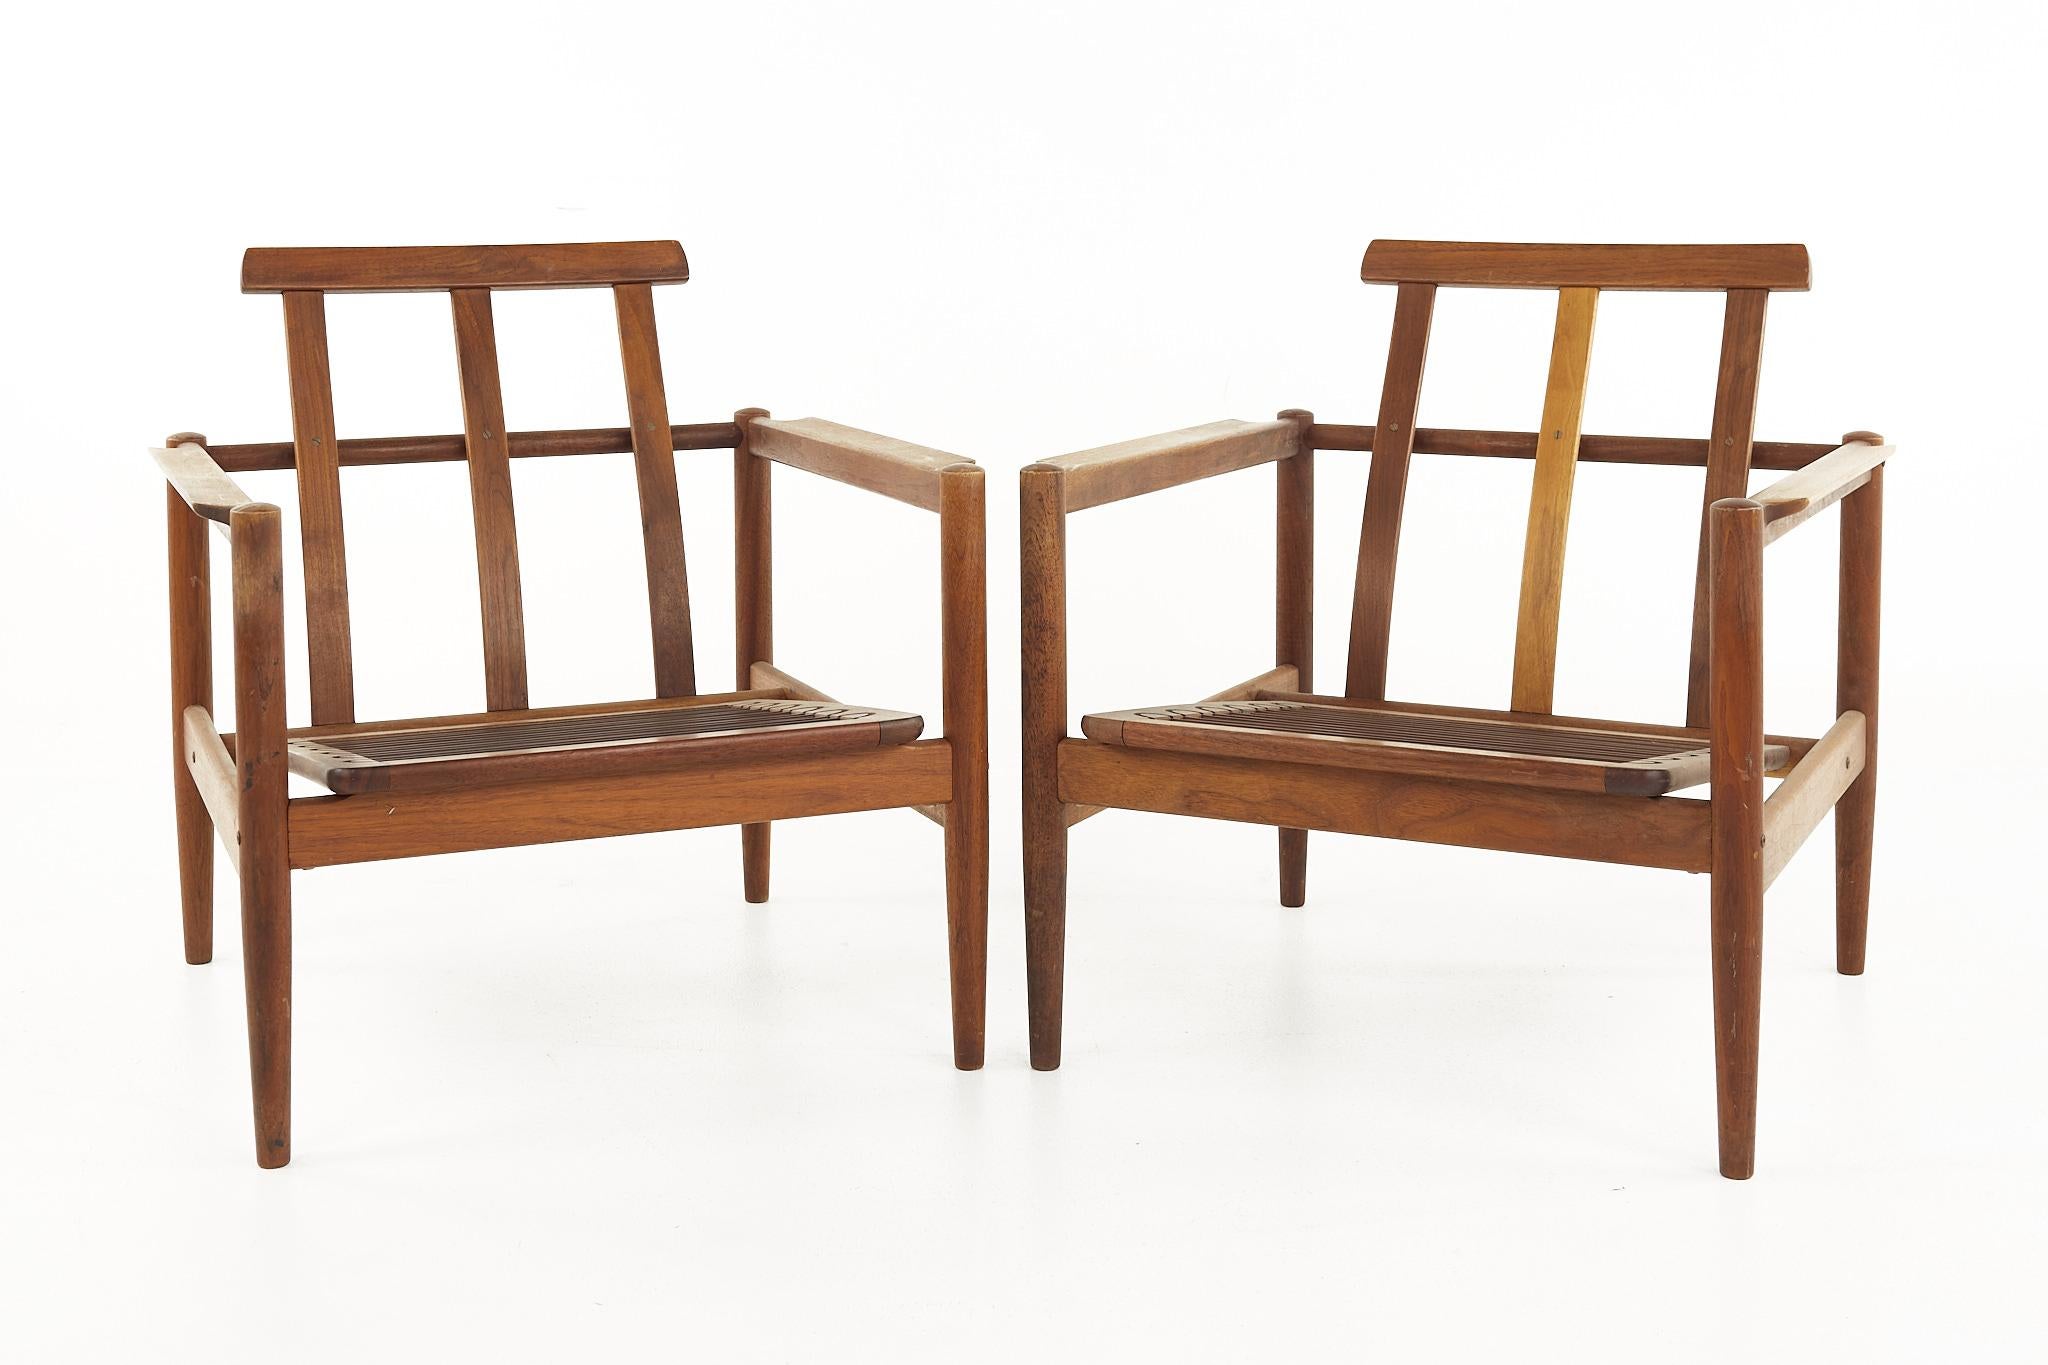 Borge Jensen and Sonner for Bernstorffsminde Mobelfabrik teak lounge chairs - a pair

Each chair measures: 26.25 wide x 21.25 deep x 27.75 high, with a seat height of 12.5 inches

All pieces of furniture can be had in what we call restored